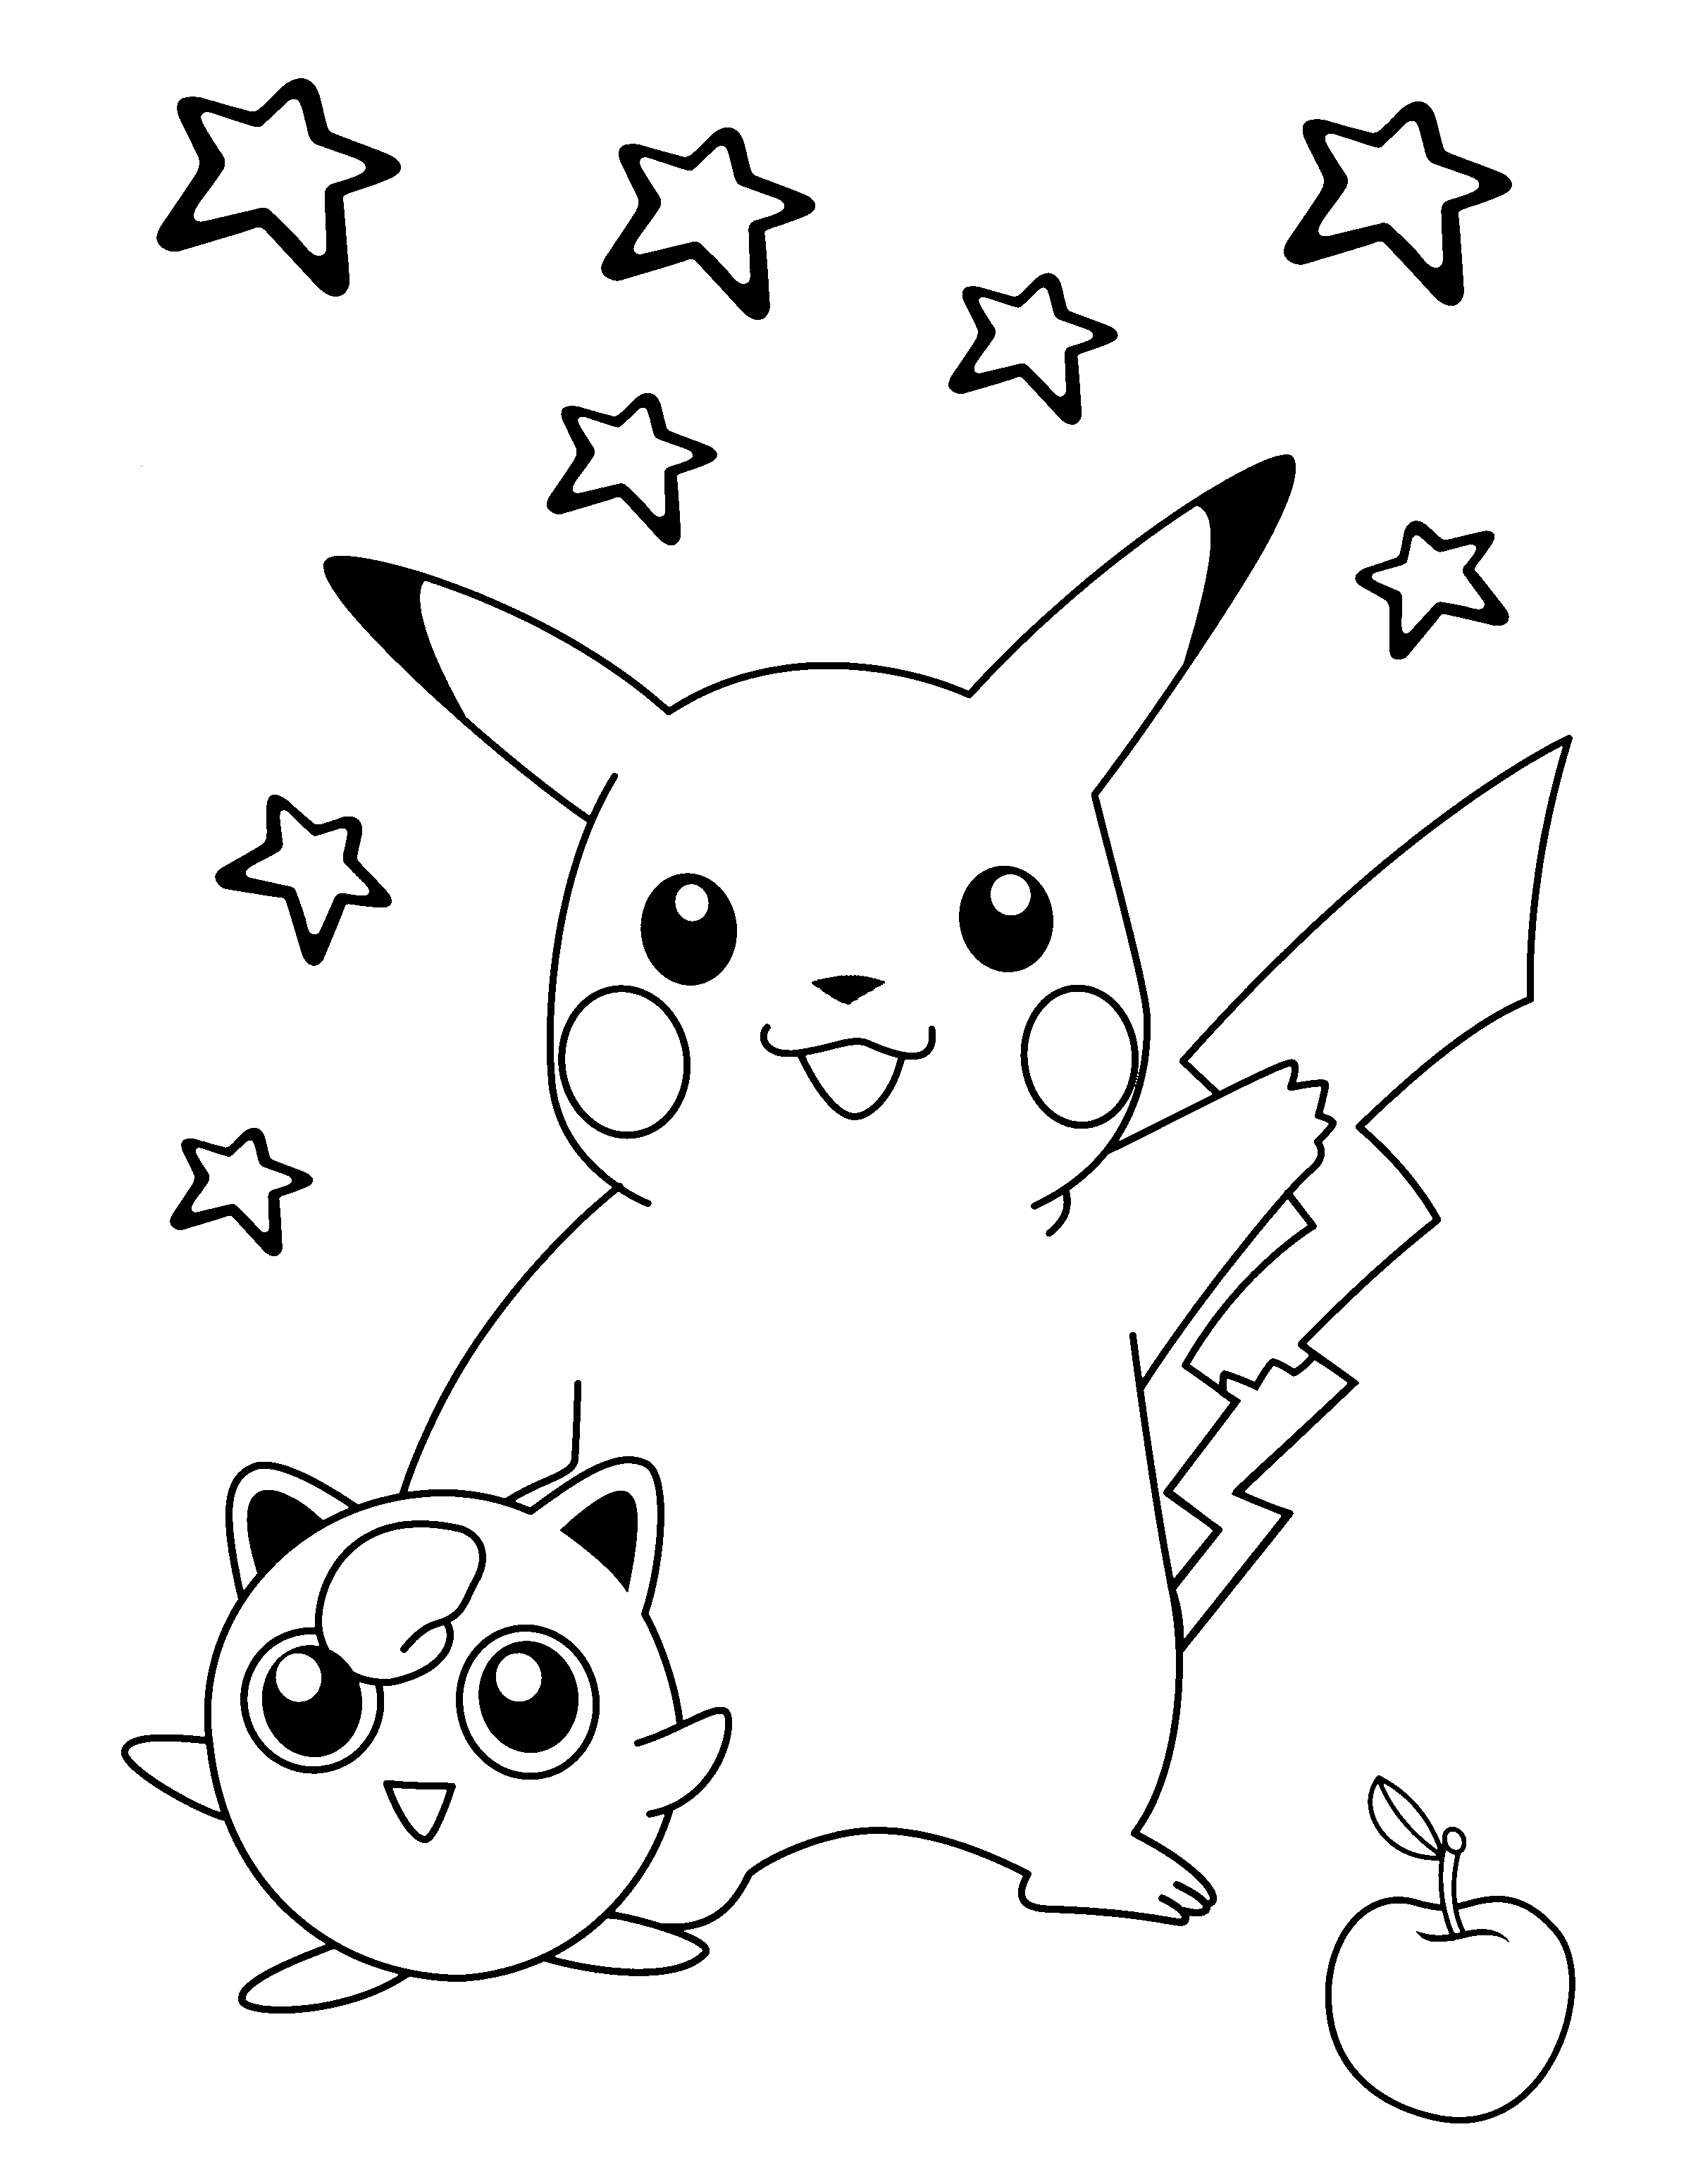 animated-coloring-pages-pokemon-image-0111